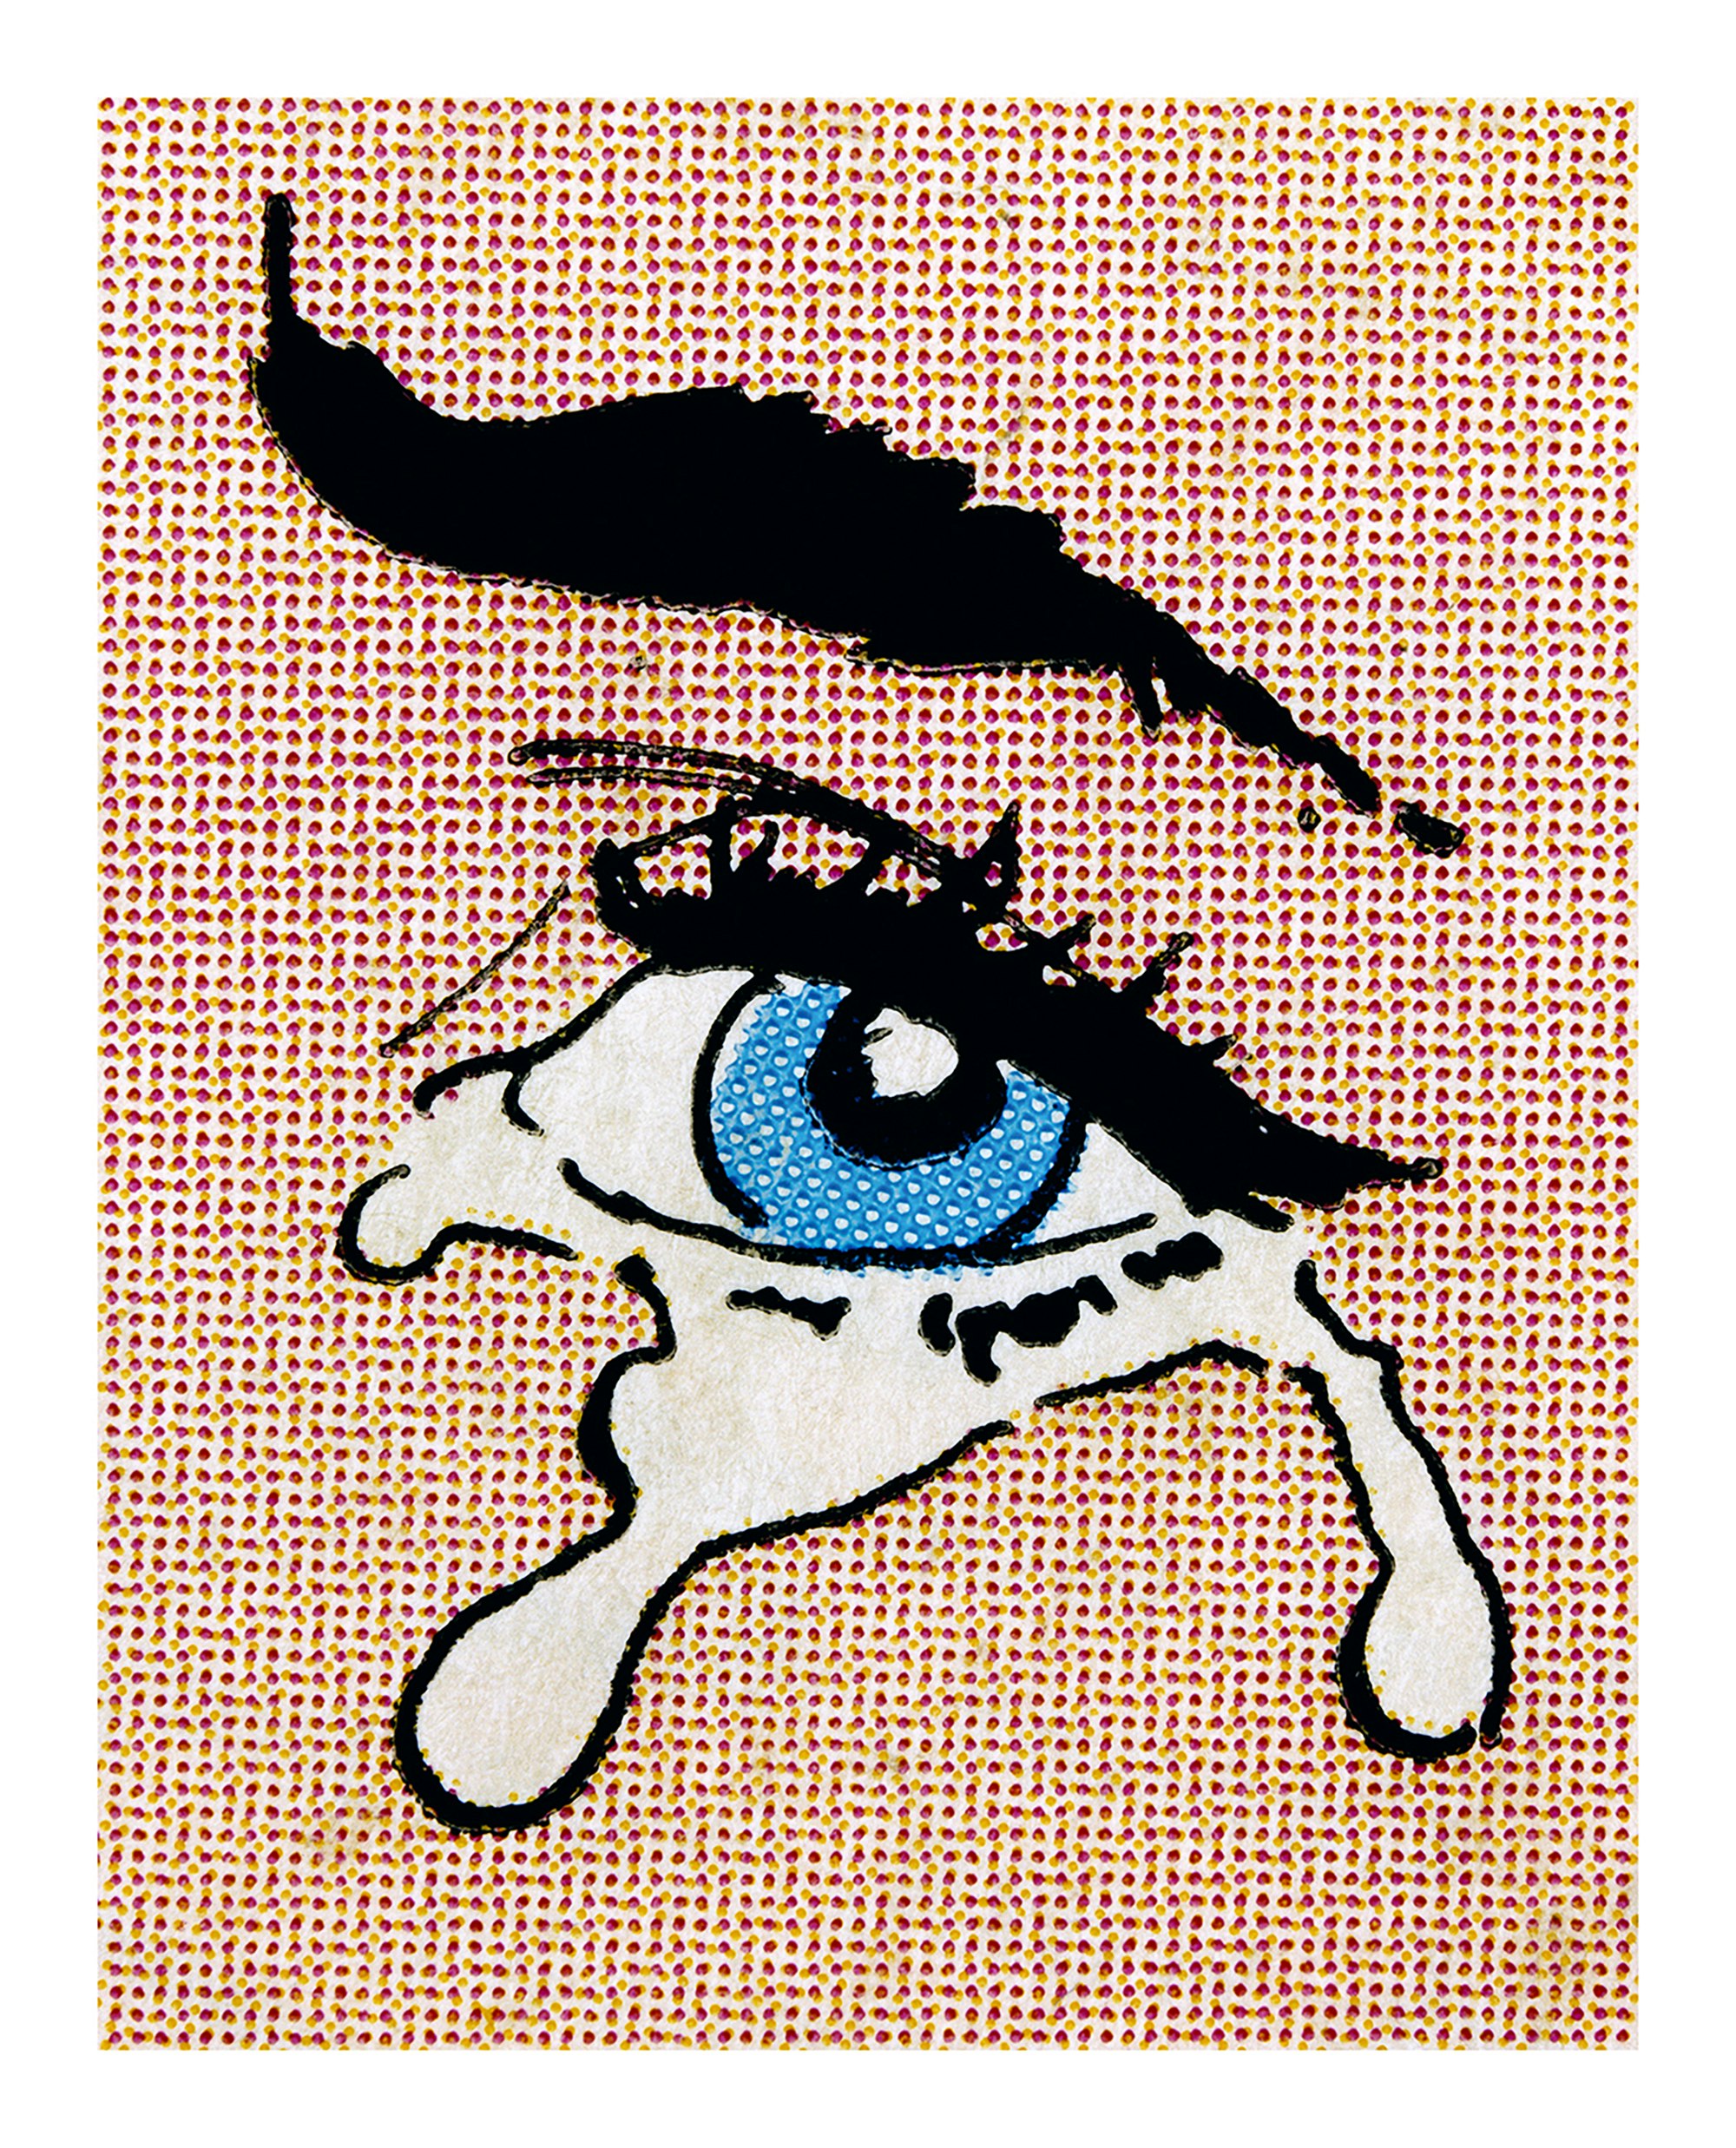 Anne Collier, <em>Woman Crying (Comic) #32</em>, 2020. C-print, 61 7/8 x 49 3/4 inches. © Anne Collier. Courtesy the artist and Anton Kern Gallery, New York.